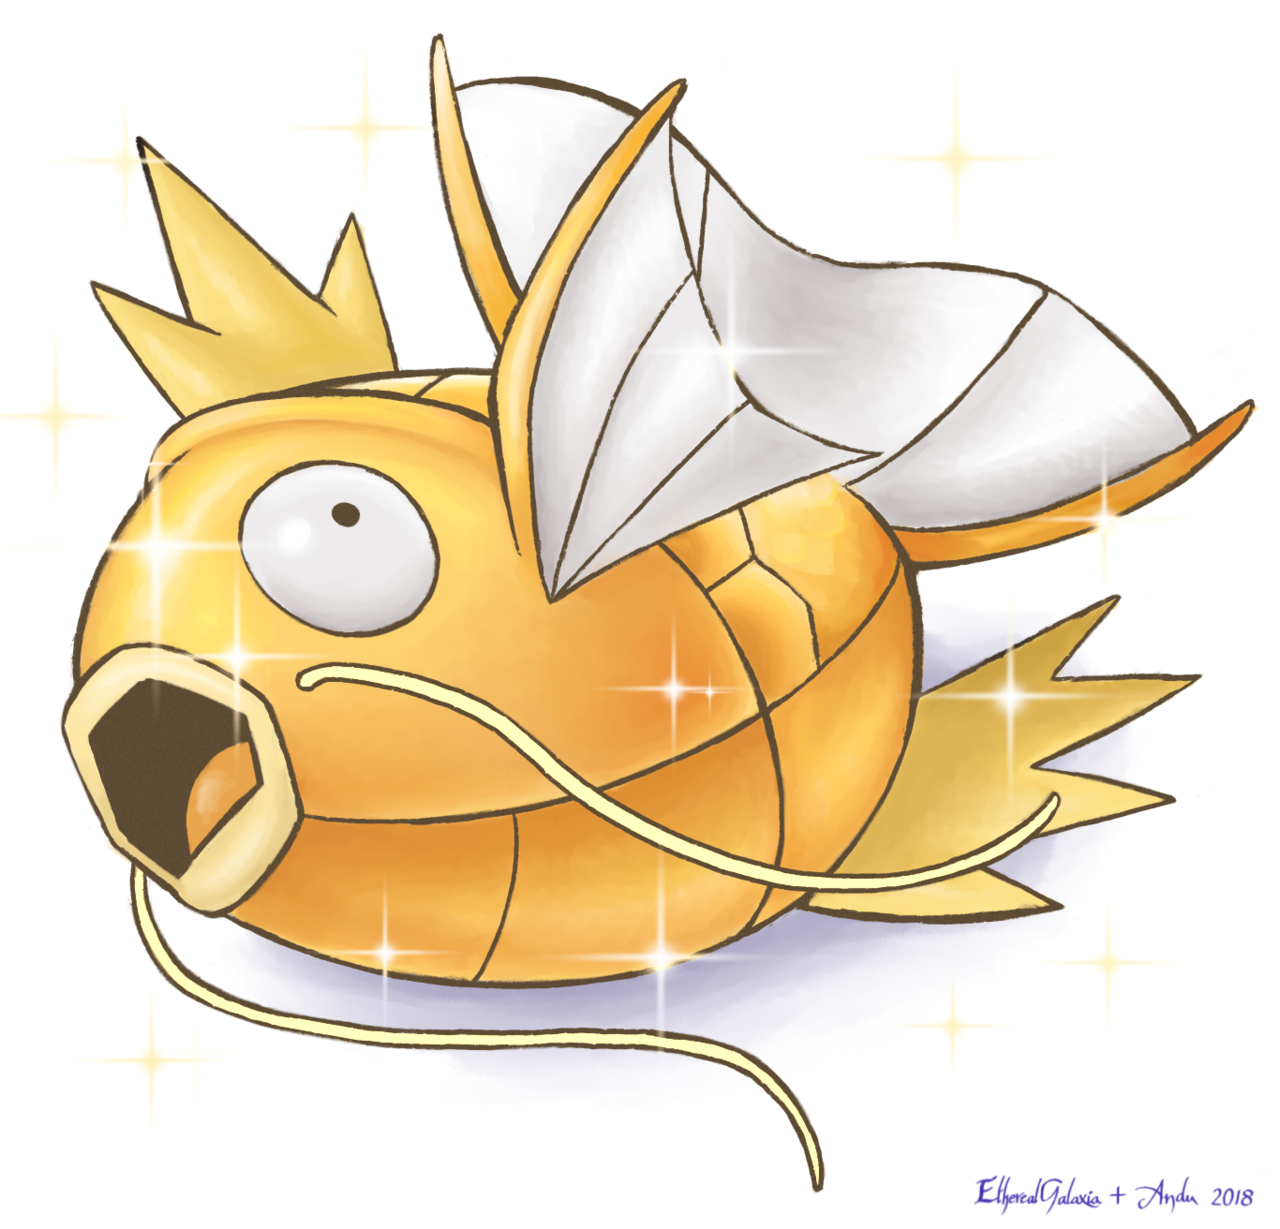 ethereal-galaxia-art:
“ Shiny Magikarp collab with my bro @shroomhue
He did the lines and I did the colouring c:
Magikarp is the best Pokemon ever and my mind cannot be changed /shot
”